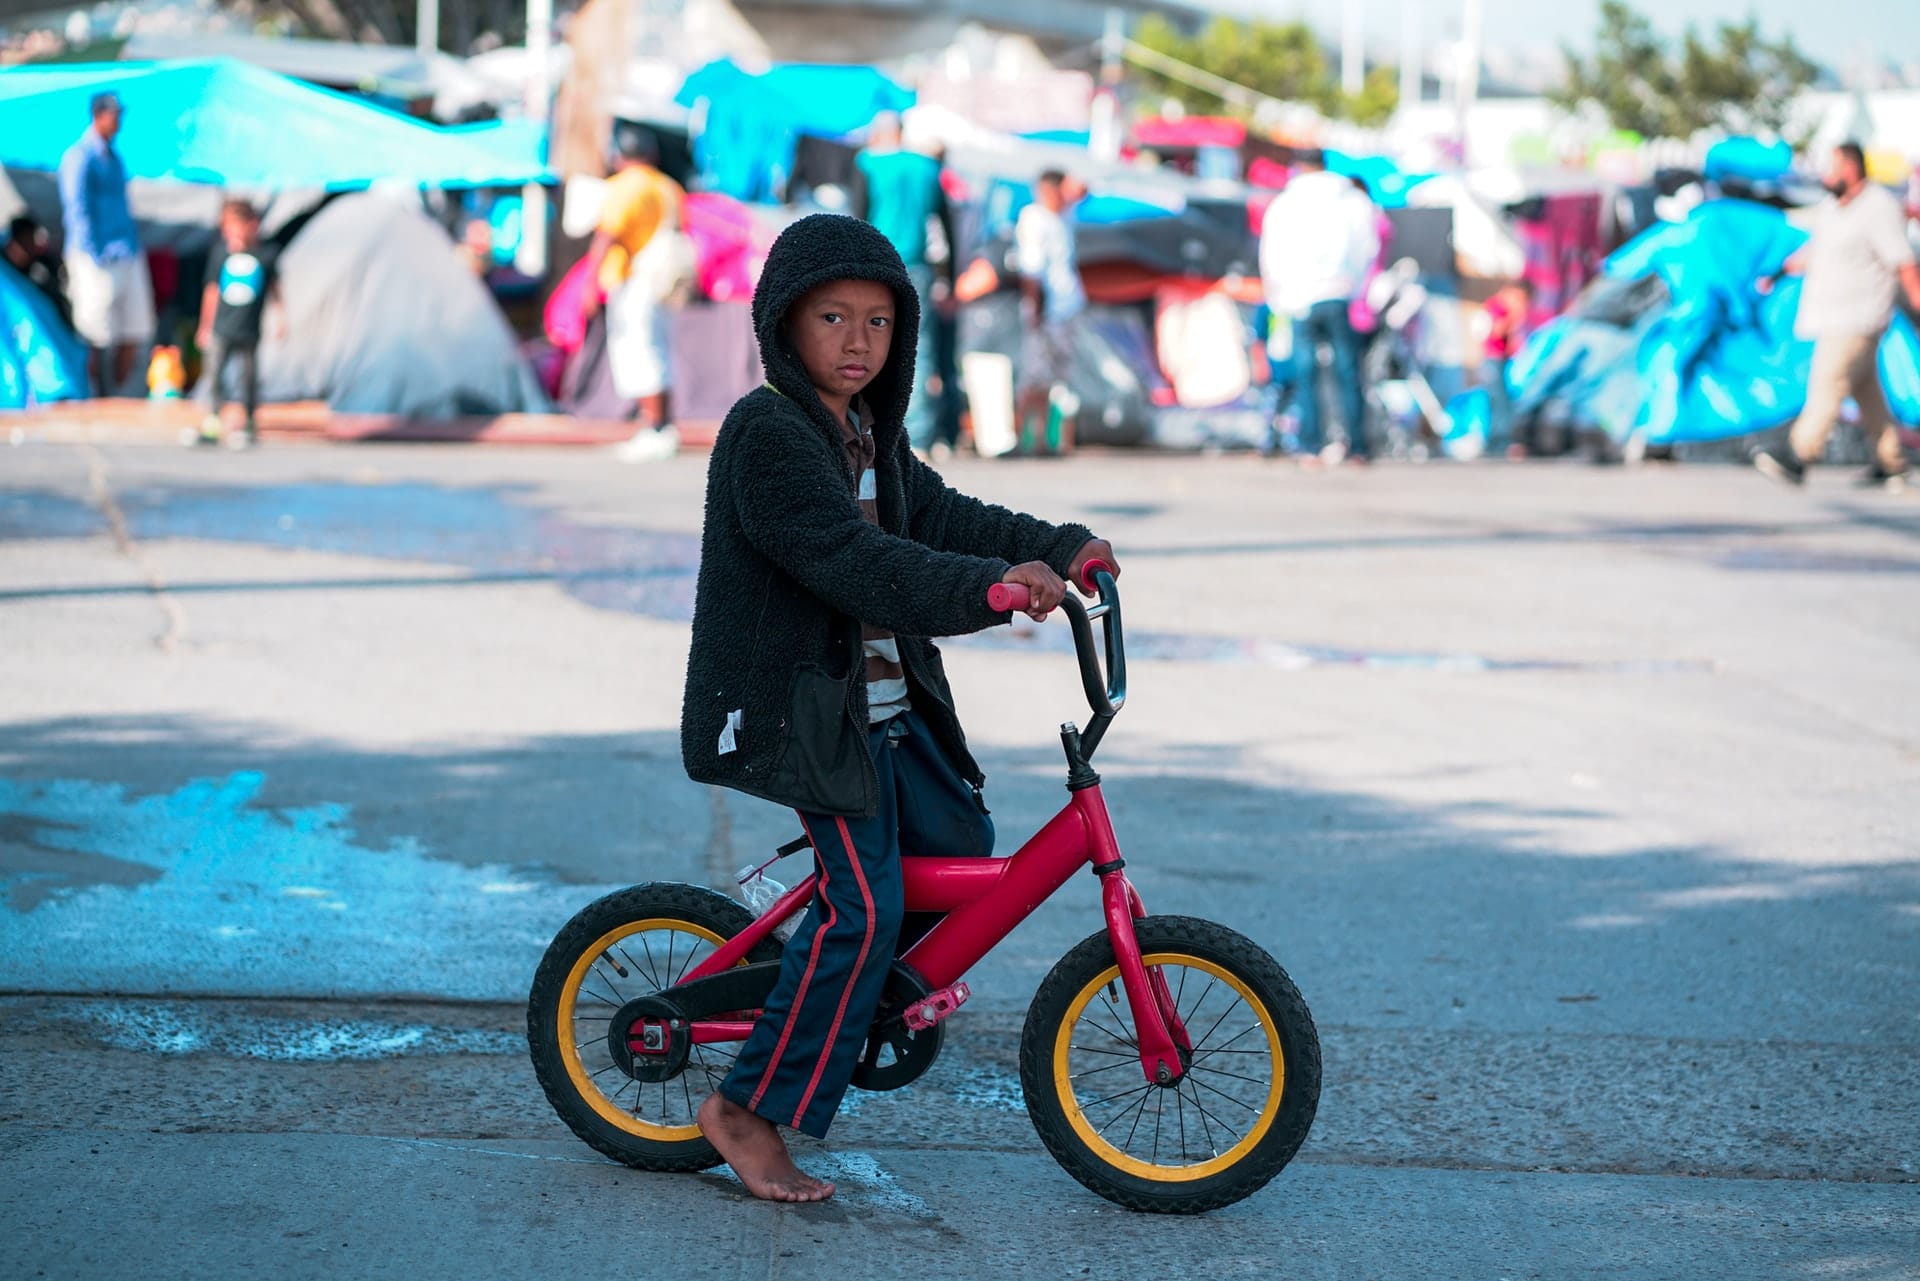 Migrant child in front of displacement tent city, representing humanitarian and compassionate grounds